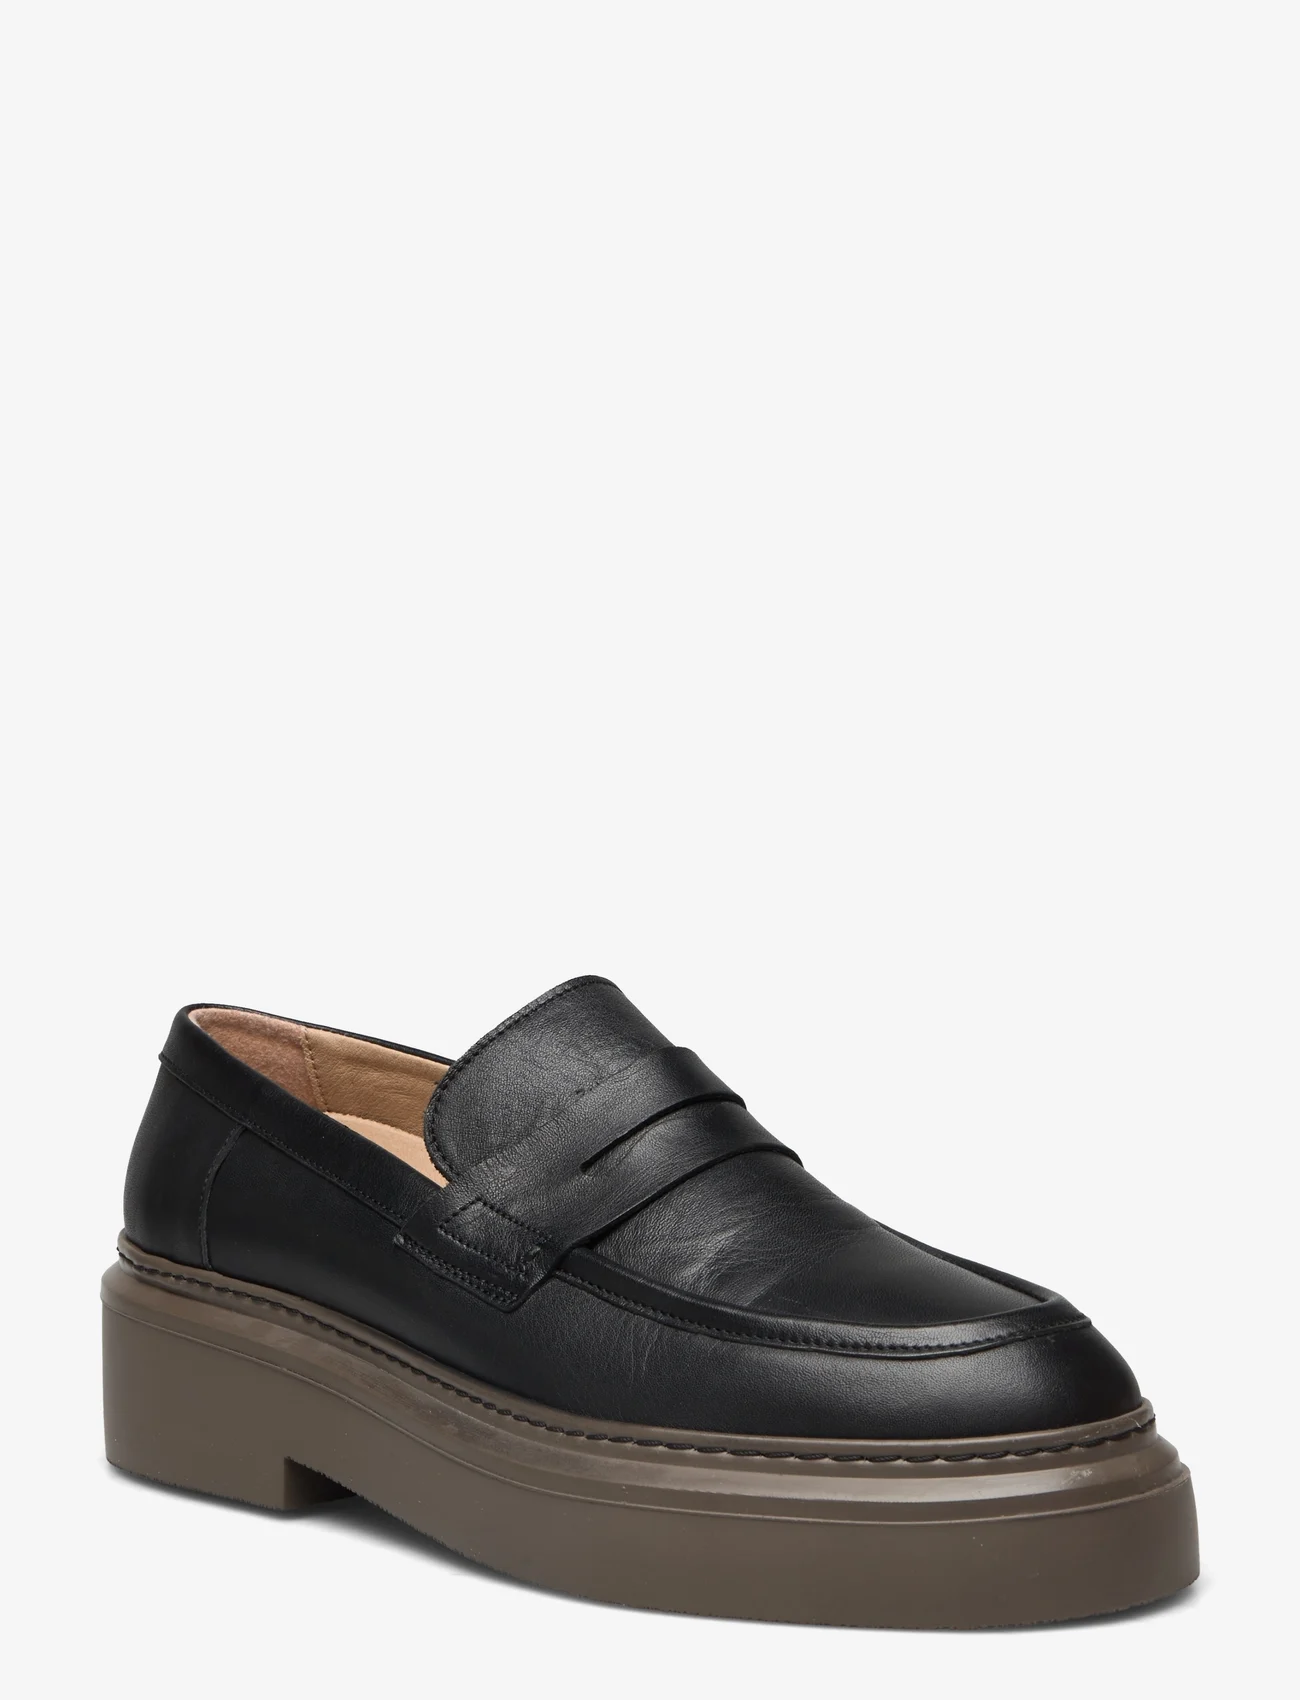 Garment Project - June Loafer - Black Leather / Brown Sole - birthday gifts - black - 0